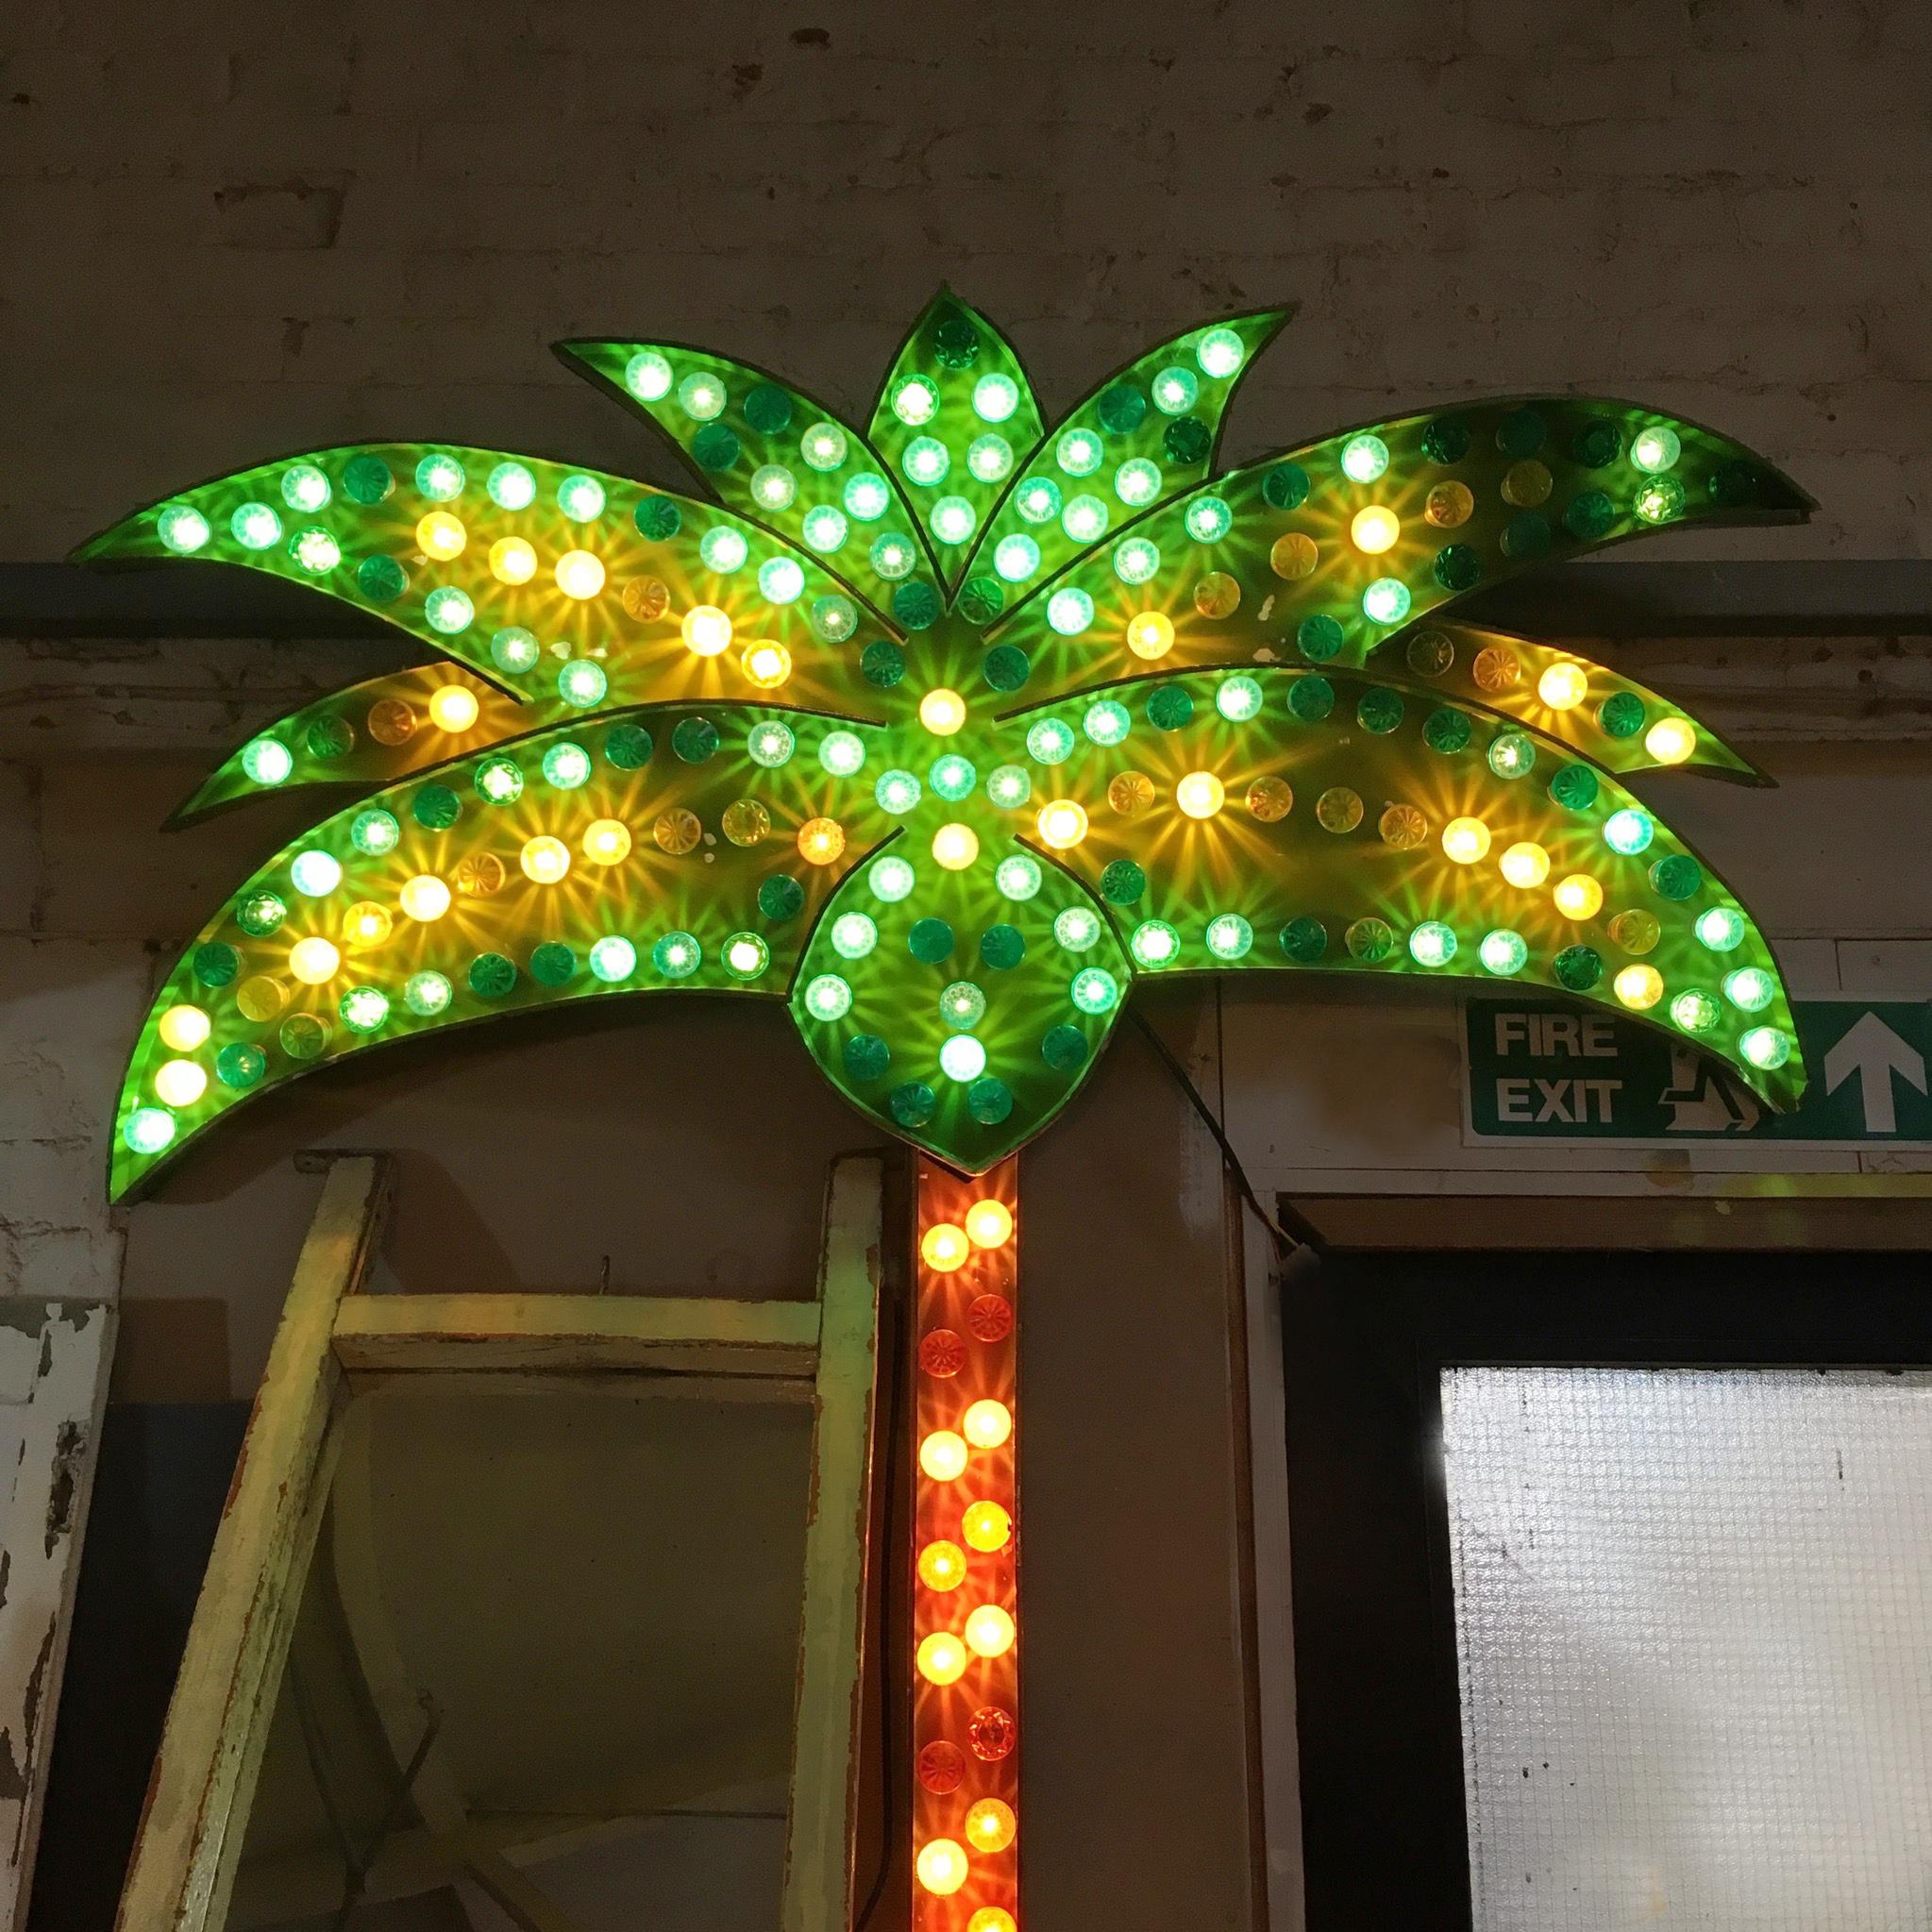 Huge 2.77m Fairground Palm tree light

British made

This Palm tree light is a genuine fairground piece from the 1980s or earlier, originally used on a traveling fairground ride in England

The tree is in 2 separate parts, the stem and then